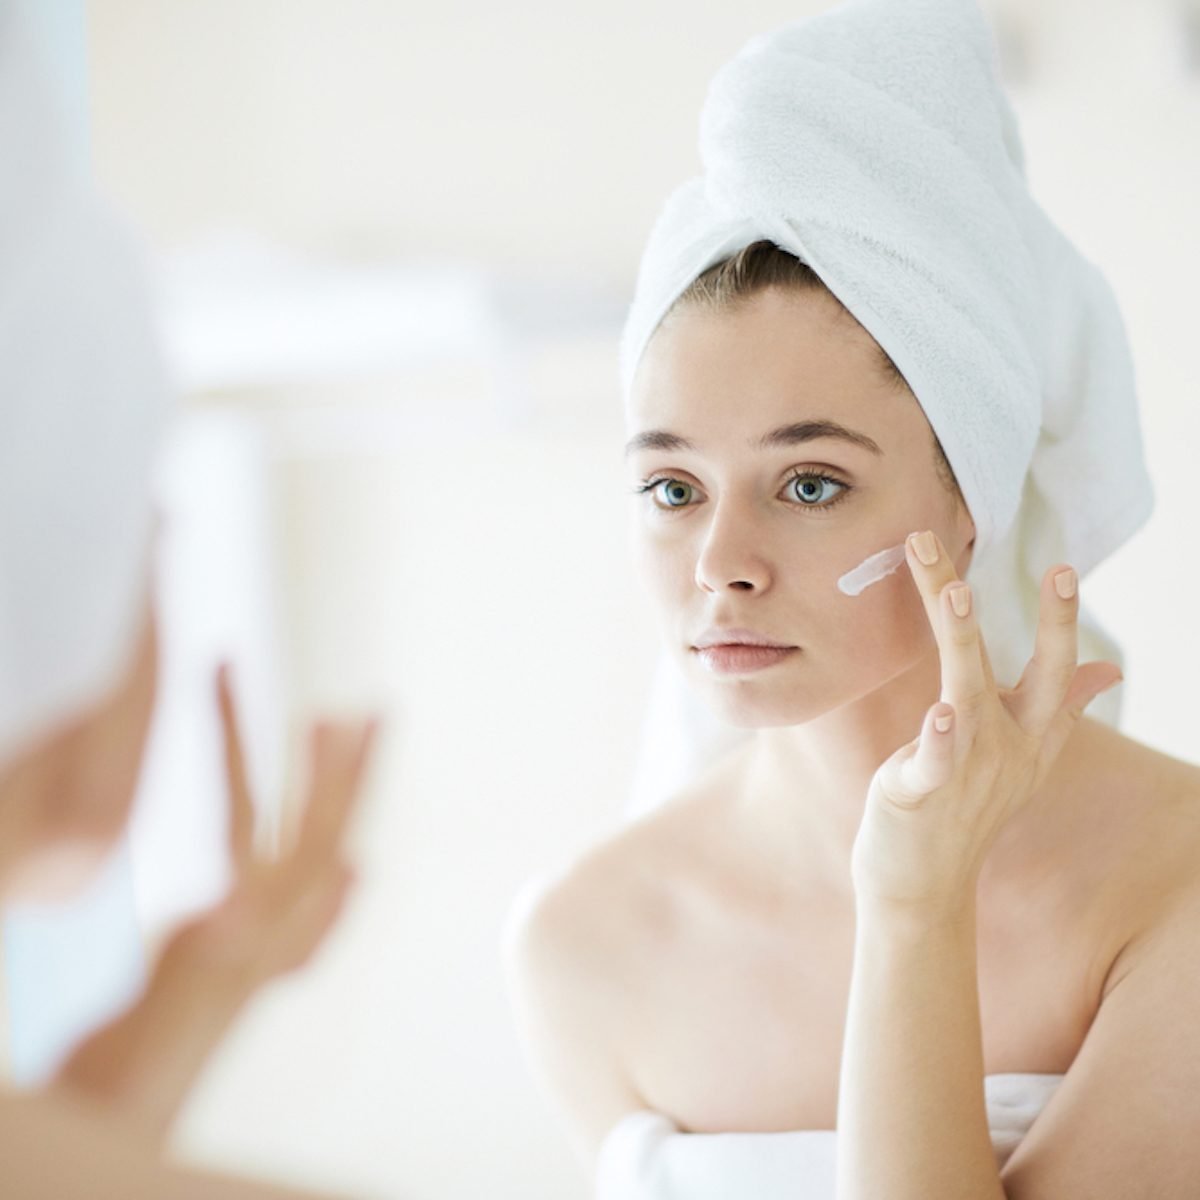 How to Get Rid of Blackheads: 12 Proven Tricks